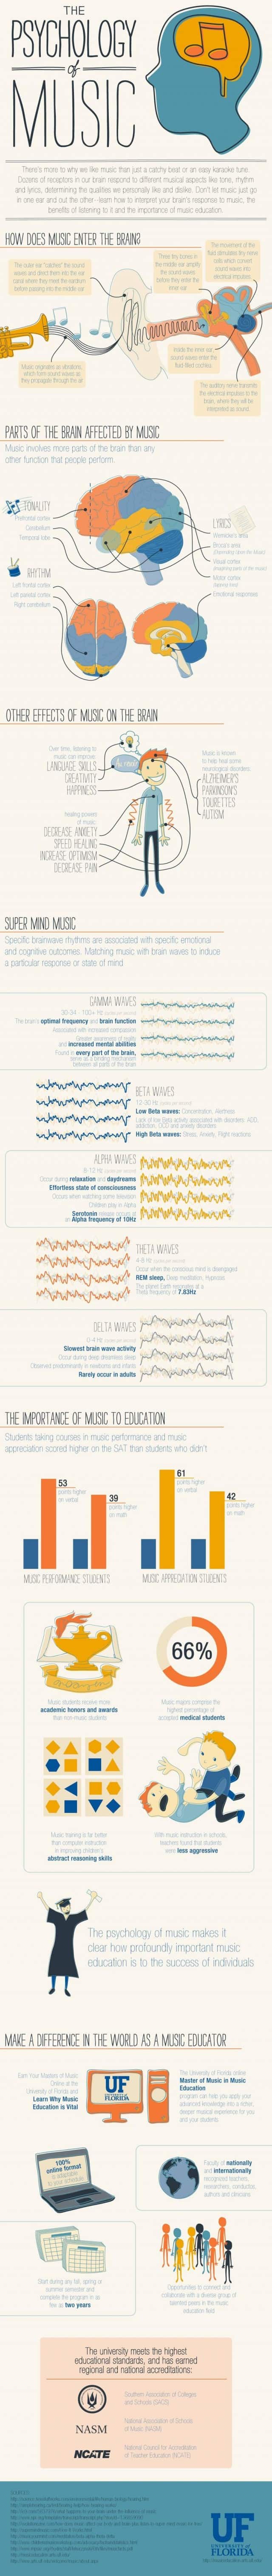 Psychology of Music Infographic